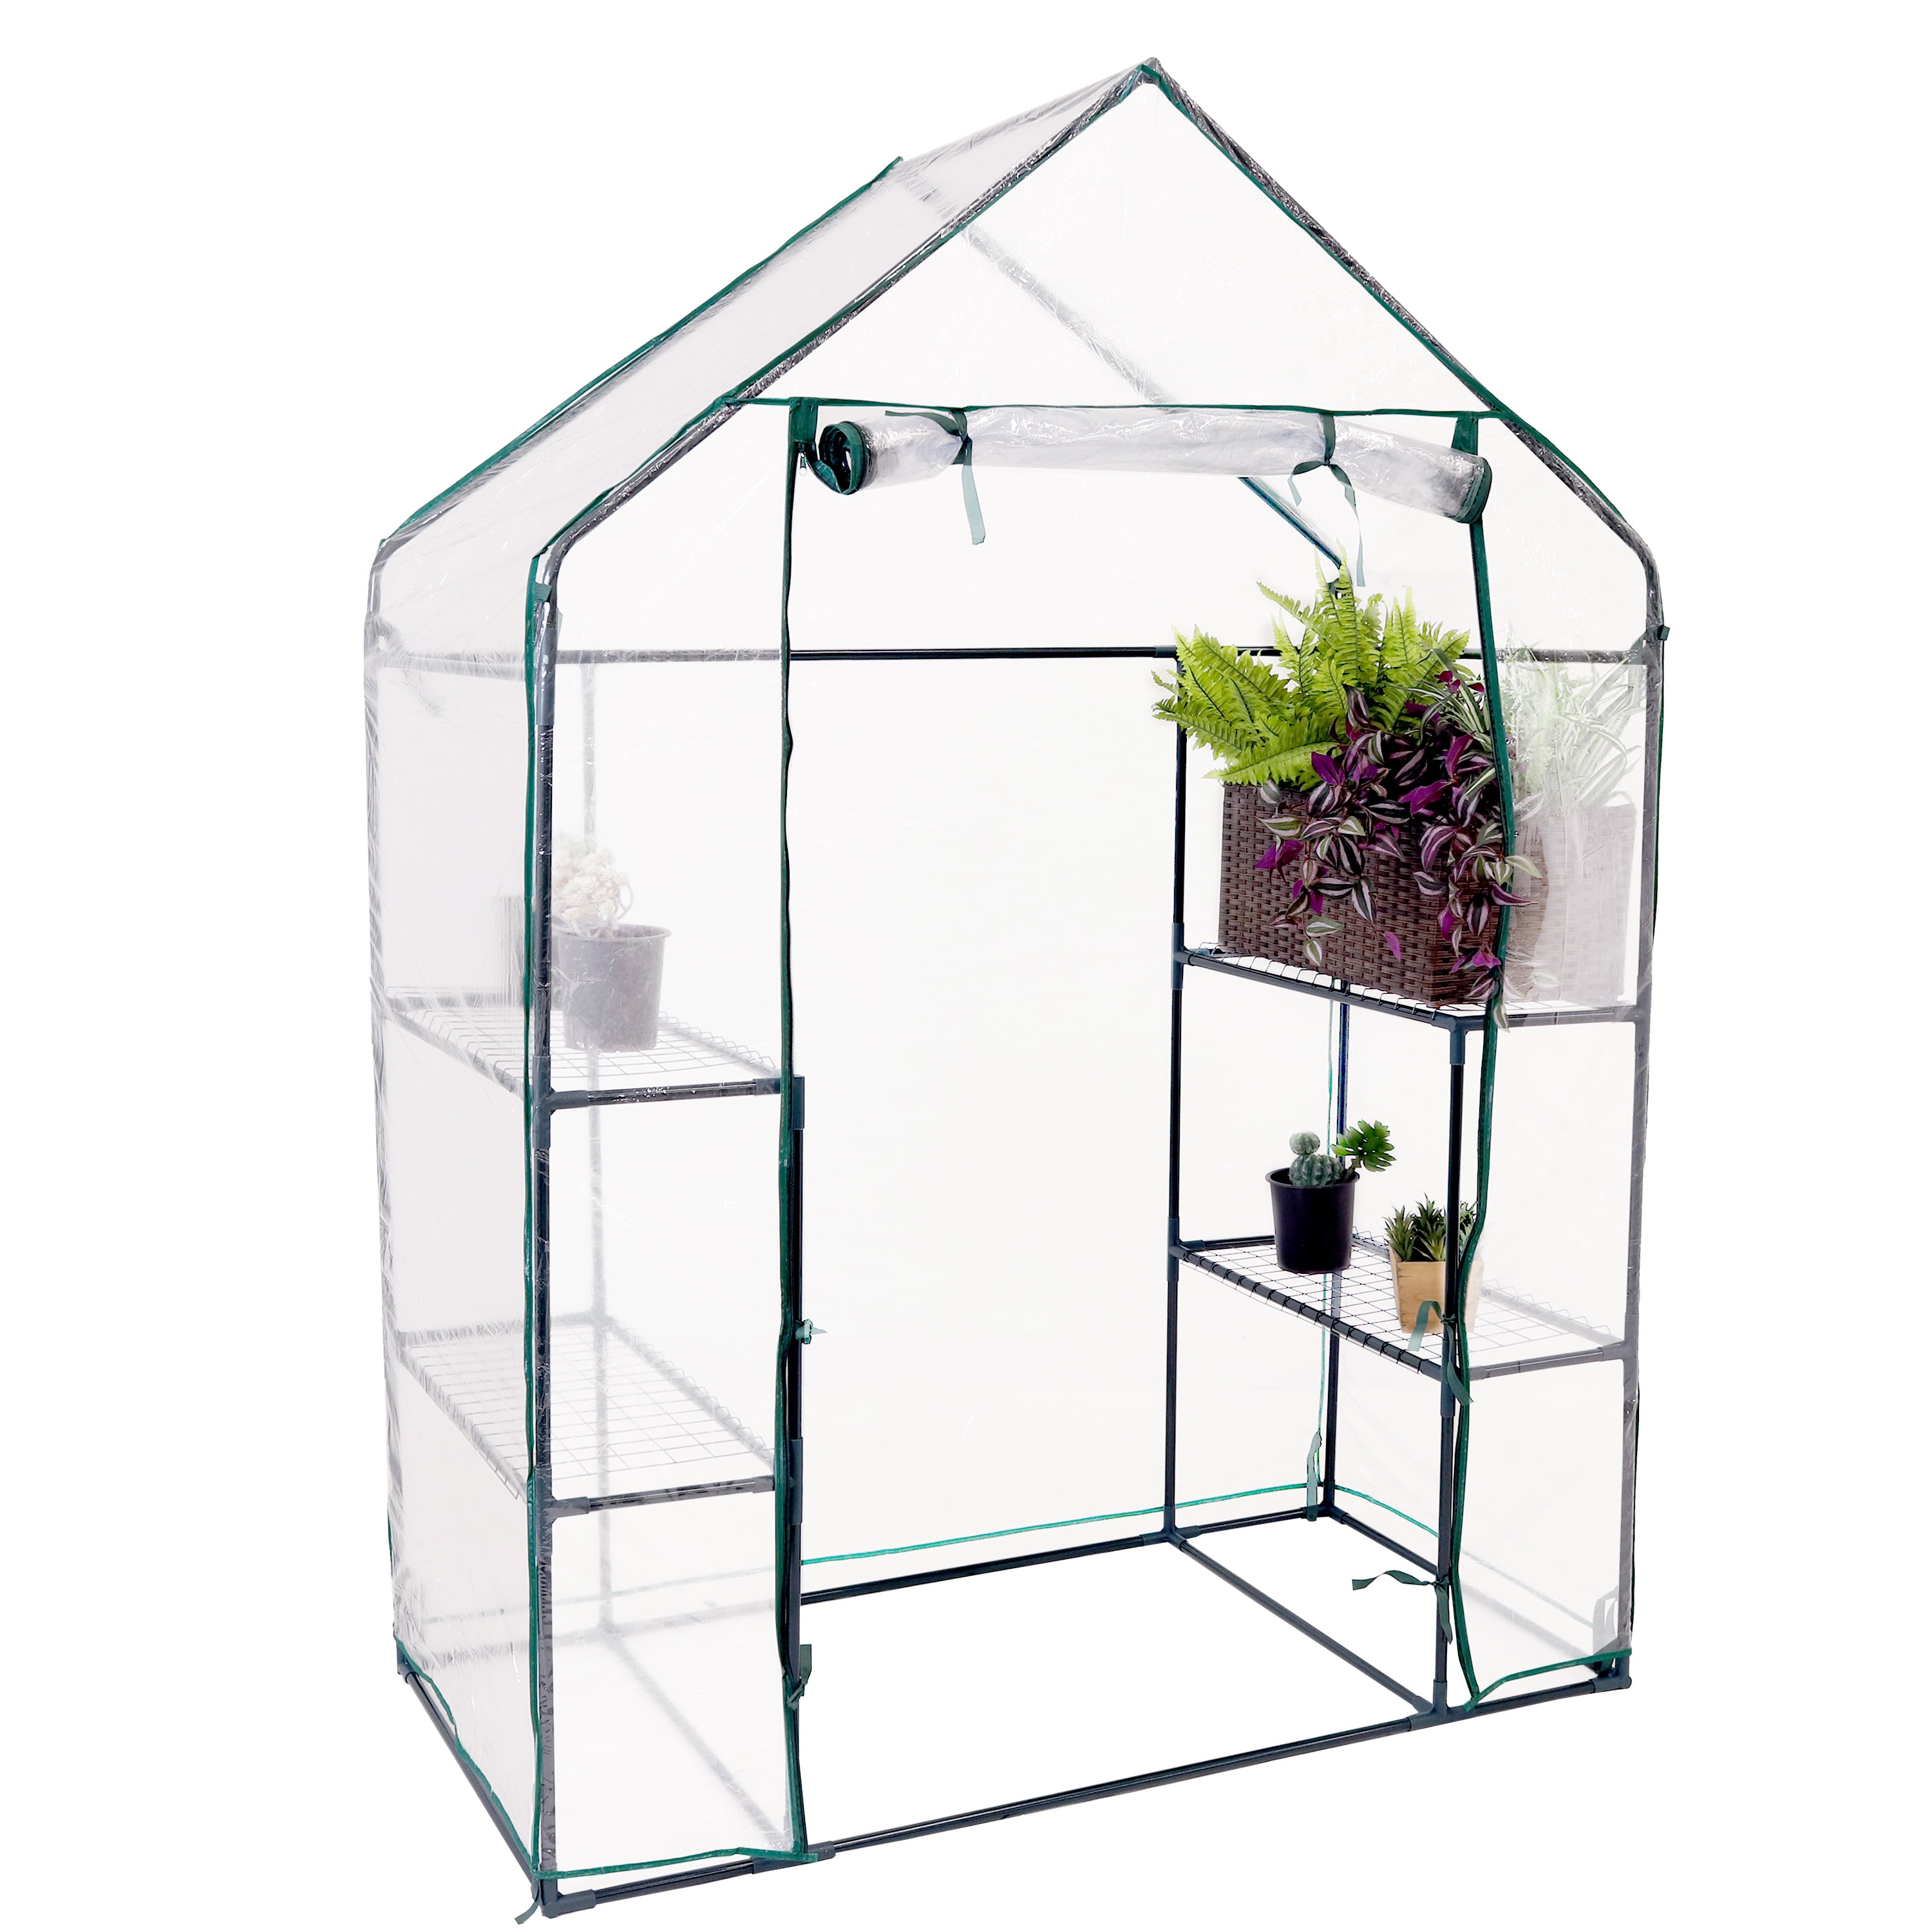 Details about   3 Tiers Mini 6 Shelves Walk In Door Outdoor Green House for Planter Portable 